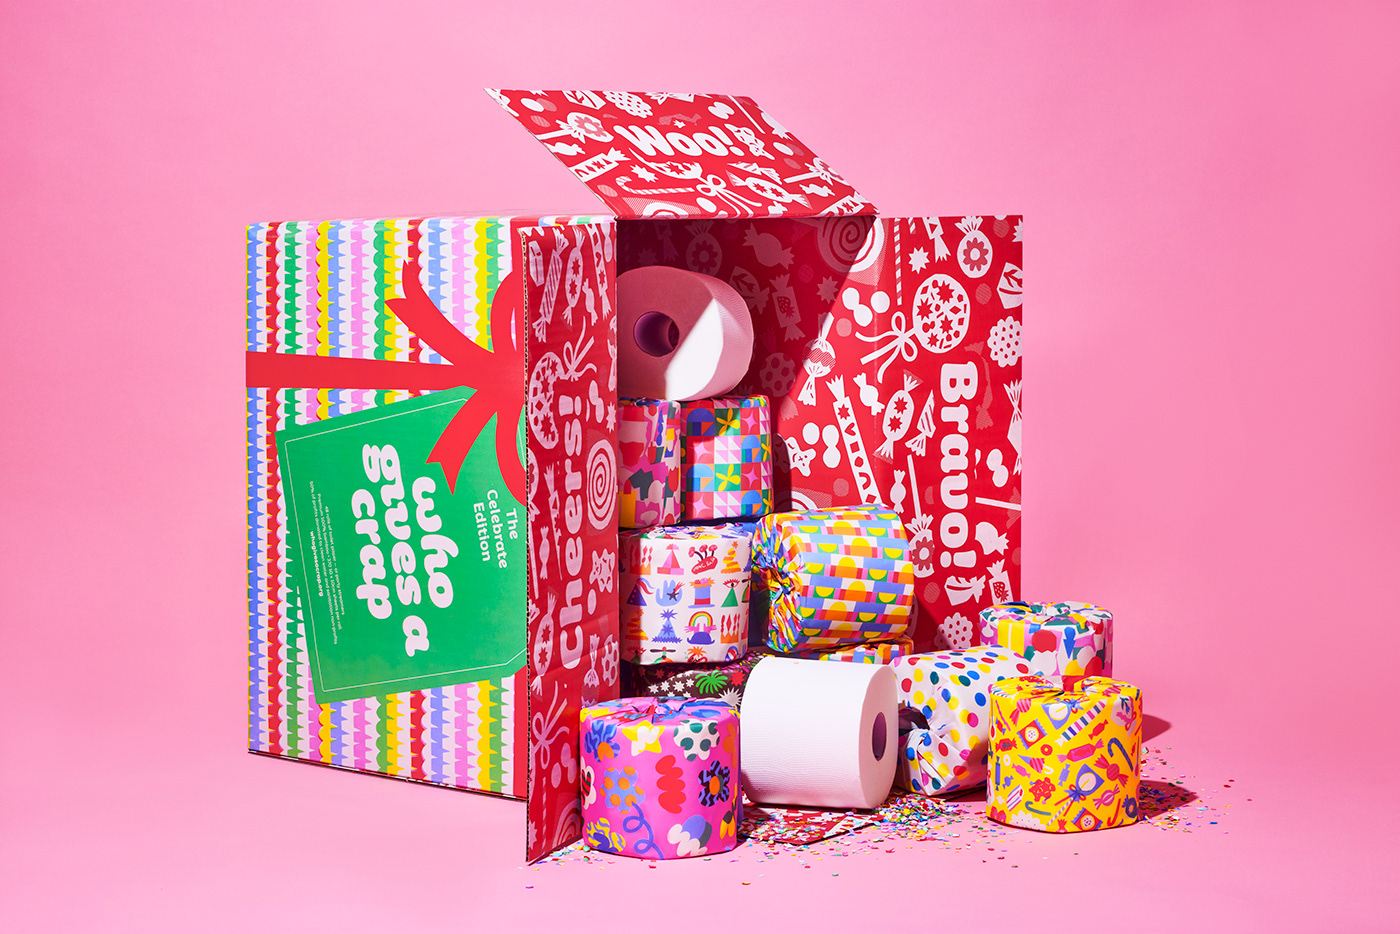 celebration cheerful colorful festive Holiday Packaging party wrapper wrapping Wrapping paper